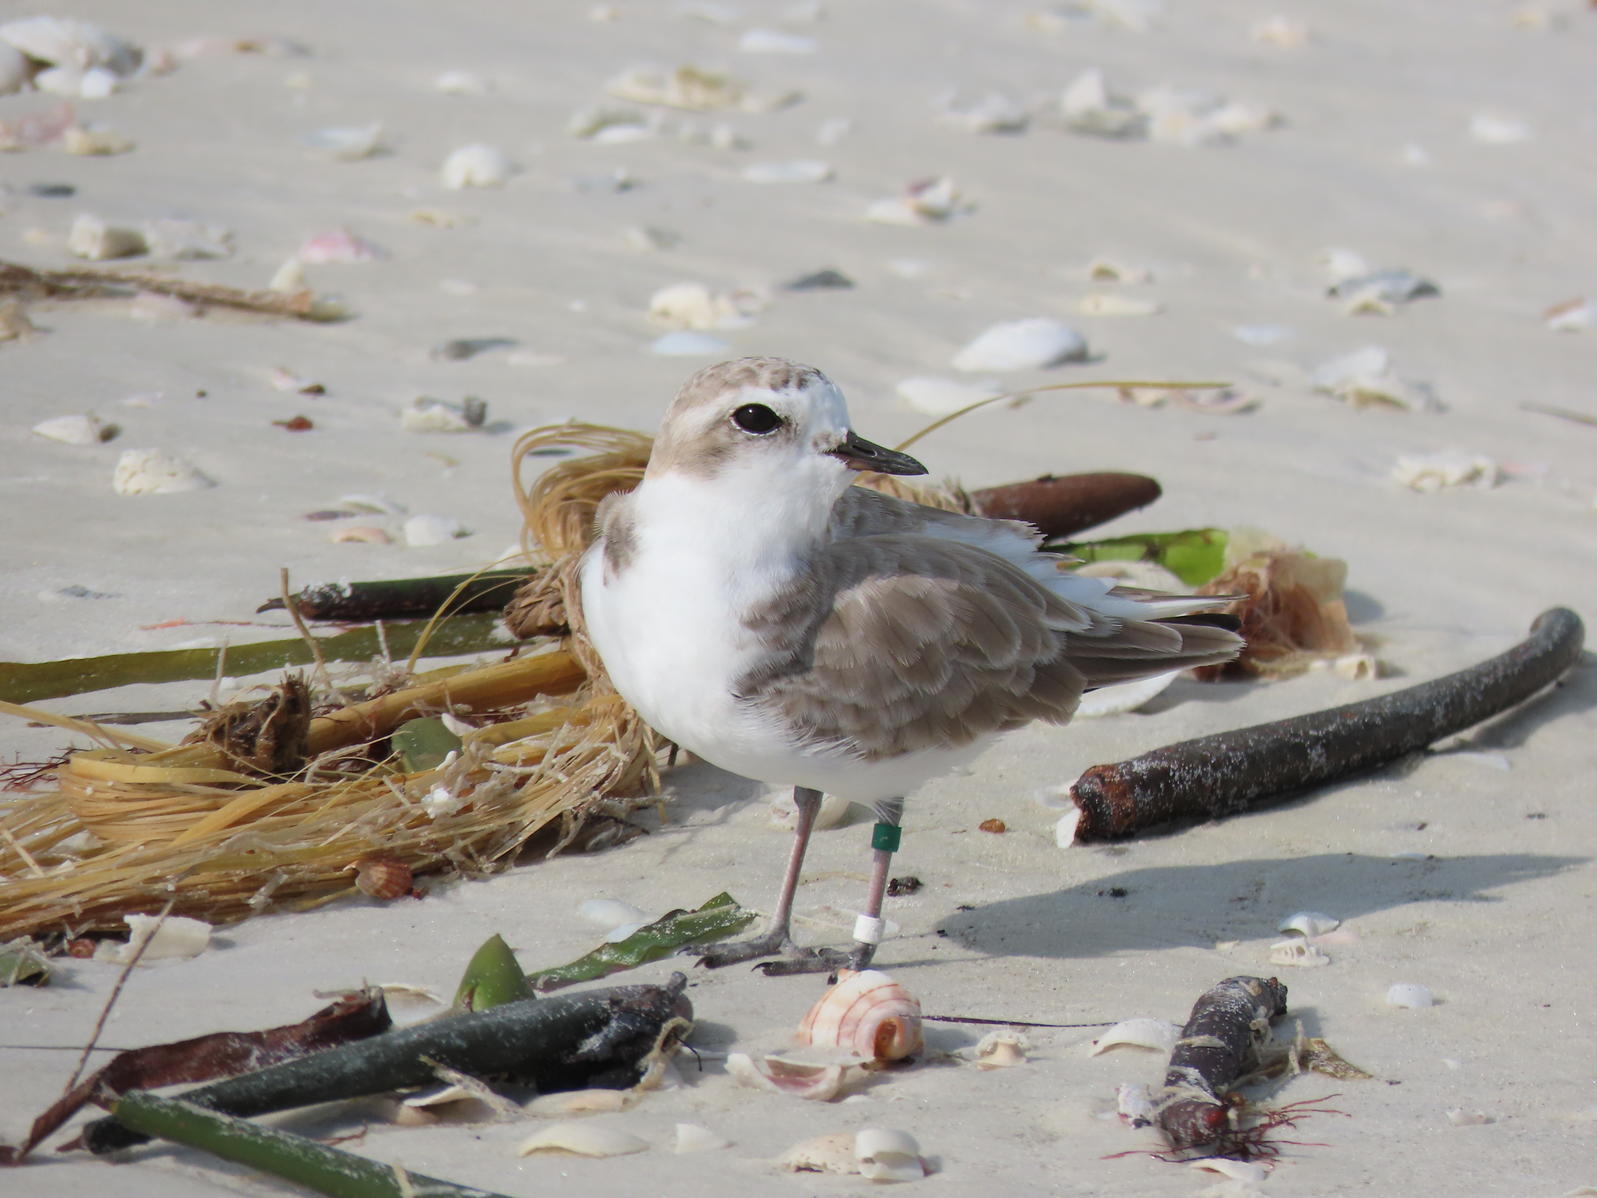 Banded Snowy Plover. Photo: Kylie Wilson.